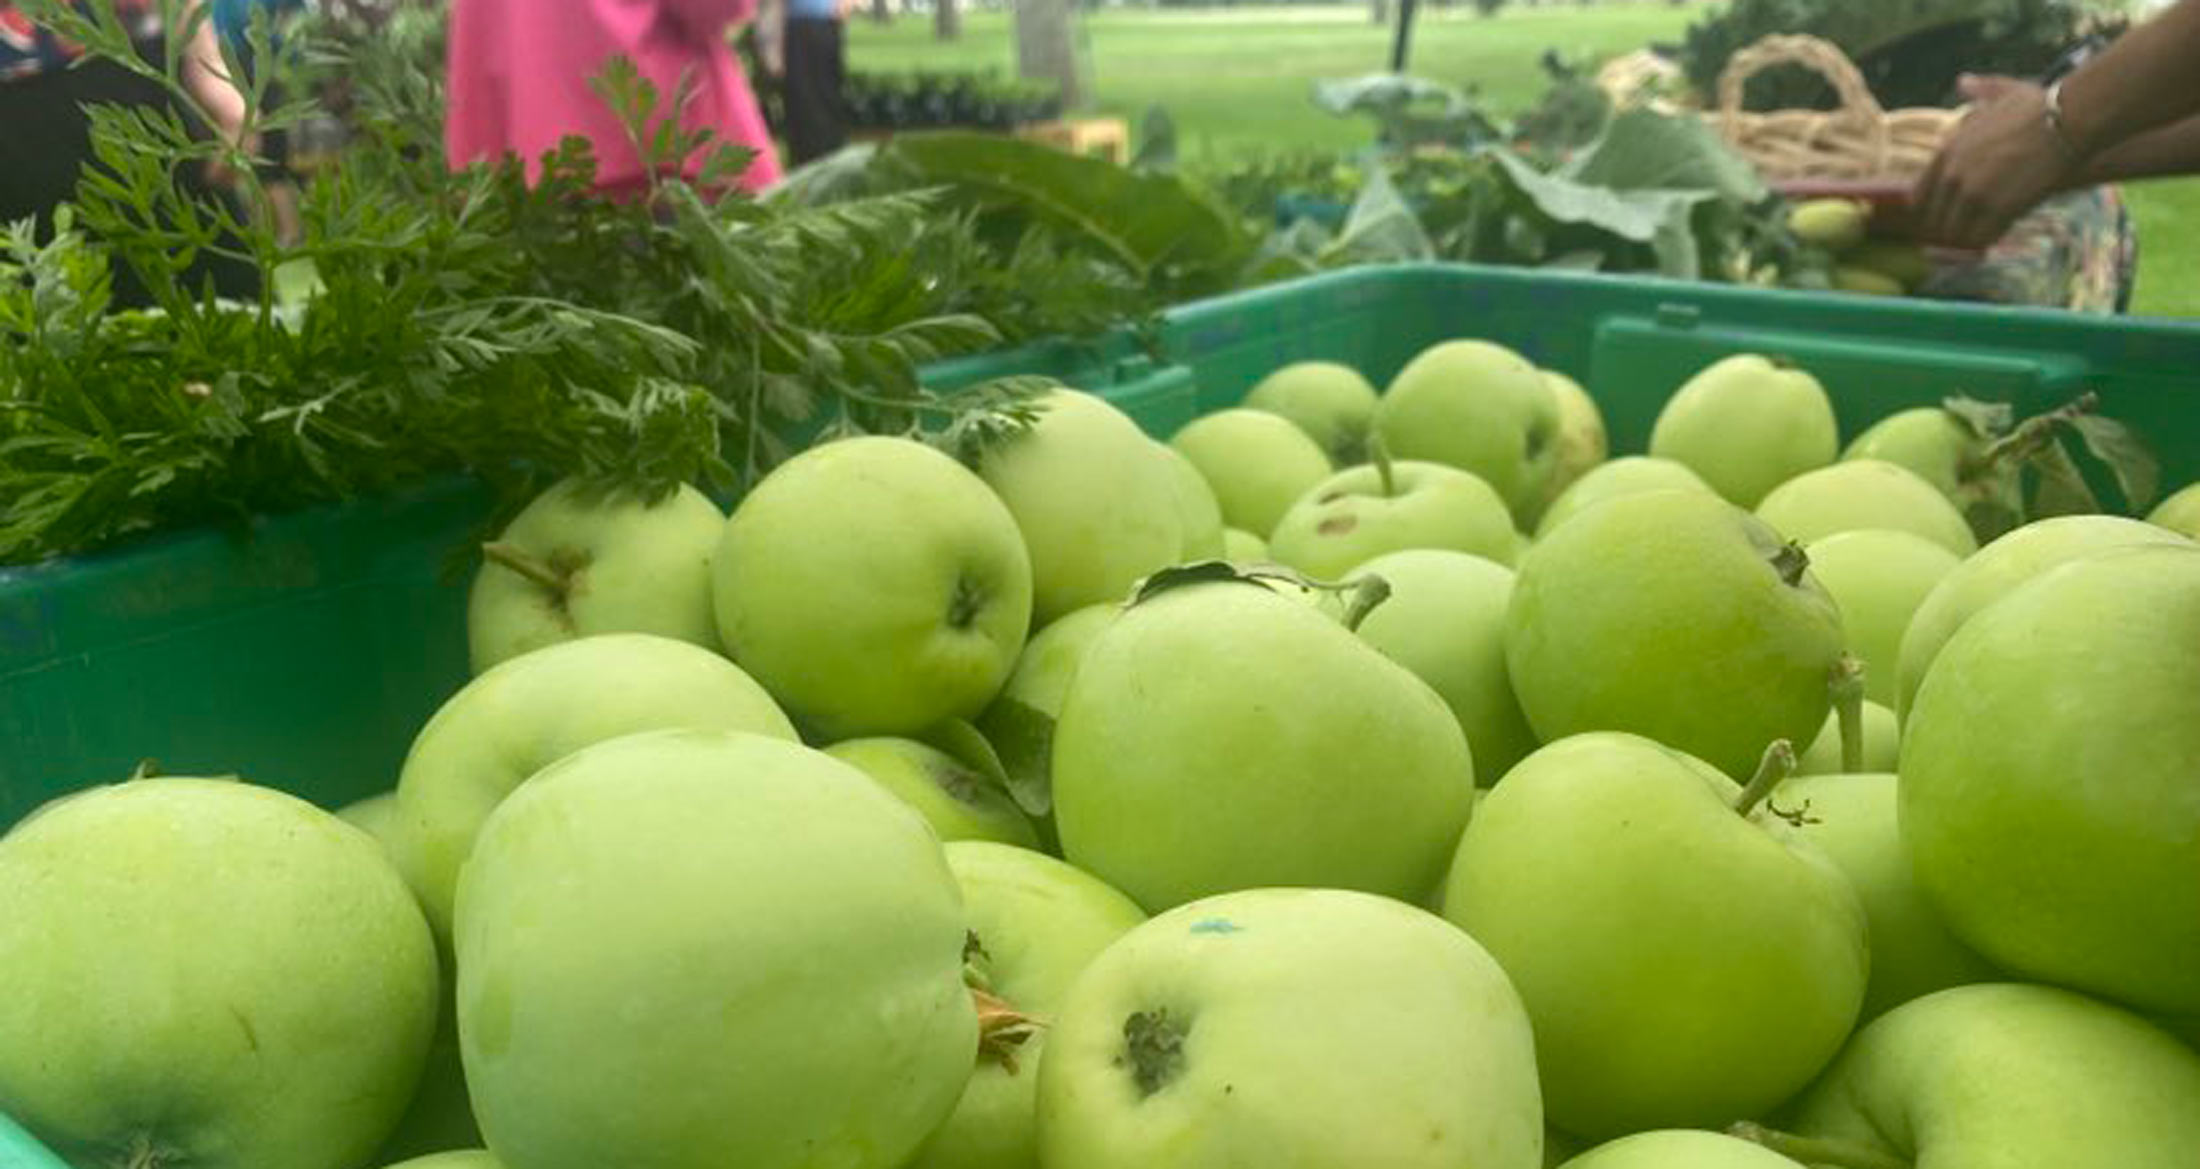 Farmers Markets Sell Fresh, Wholesome Goodness